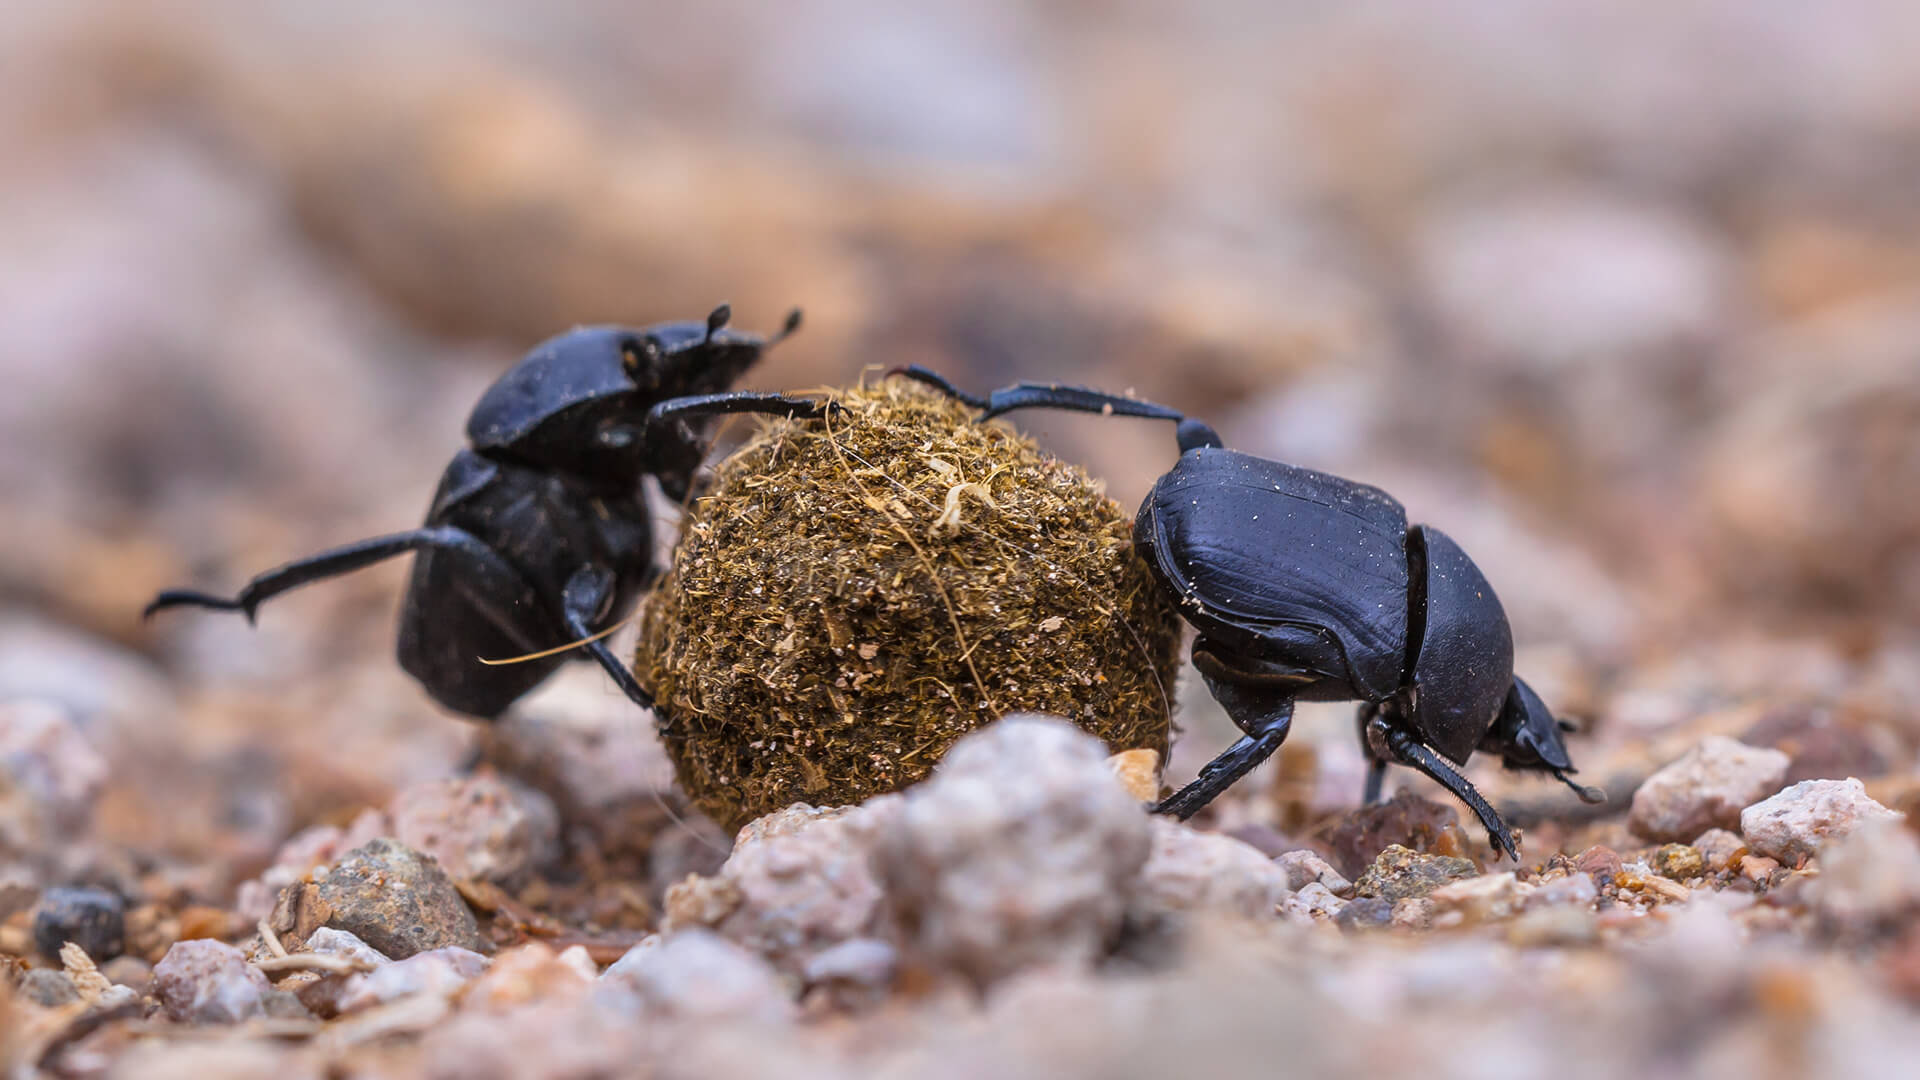 Two dung beetles rolling a ball of dung on gravel